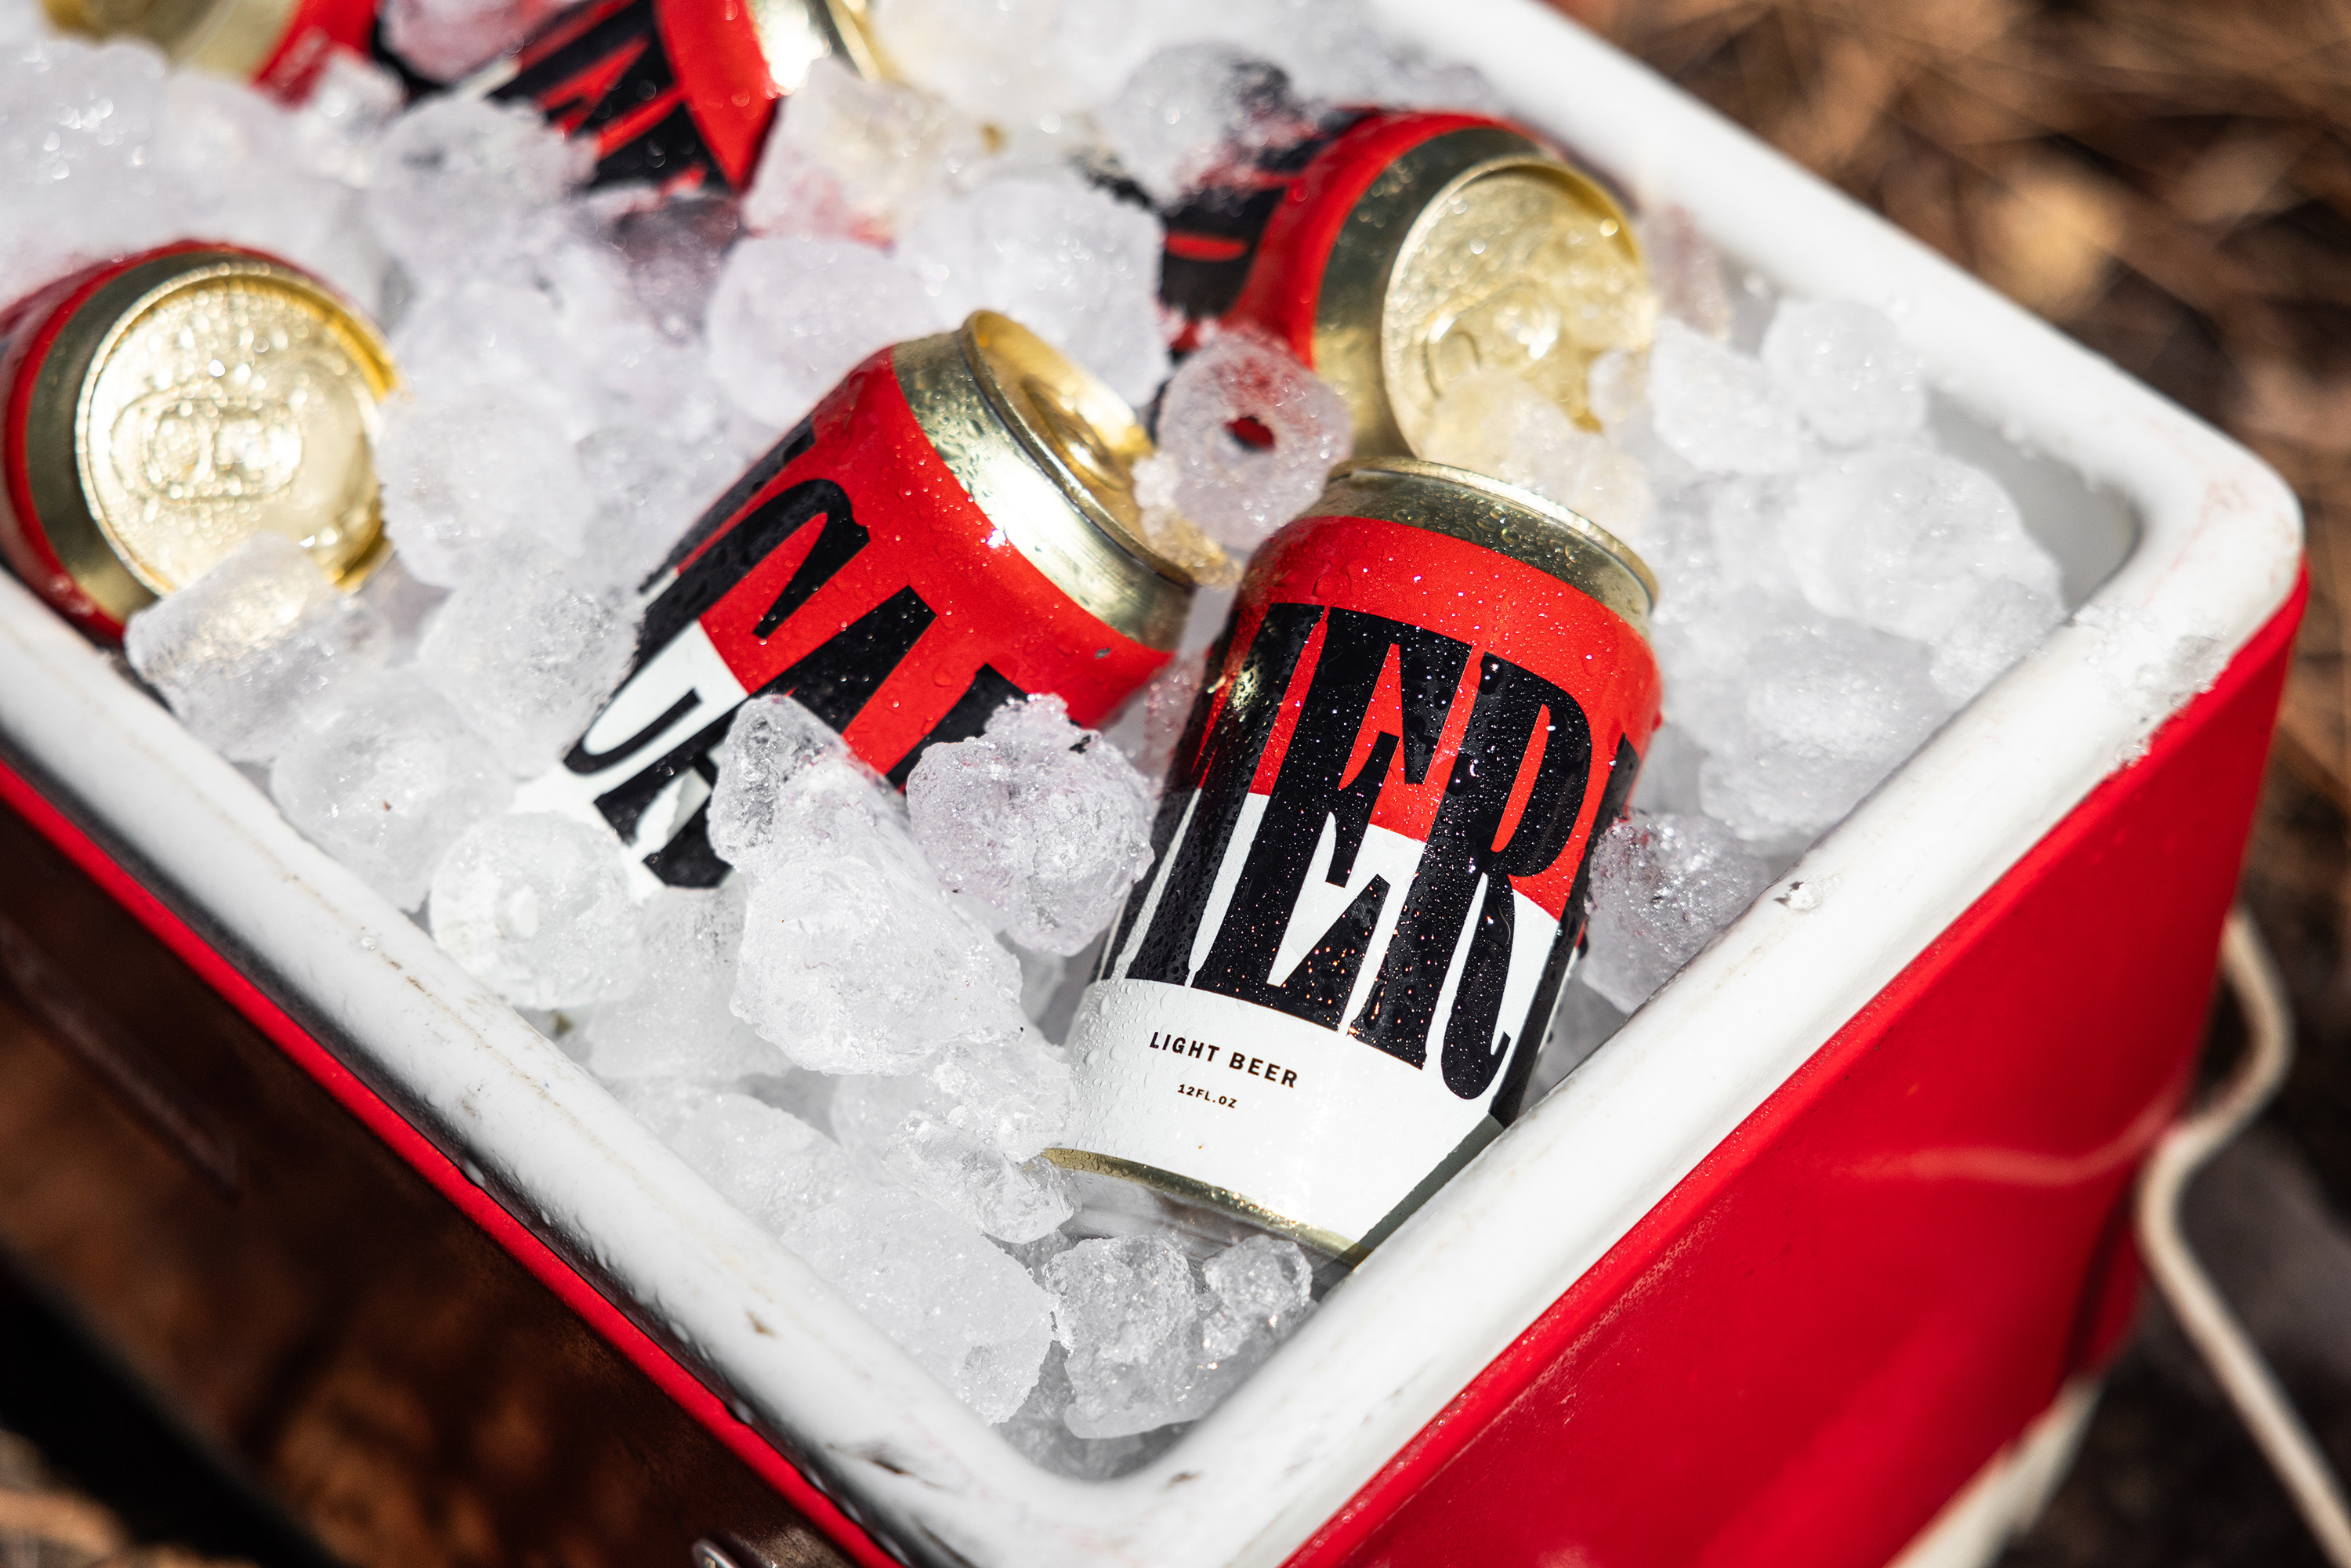 Several cans of Merican beer nestled among ice in a red cooler.